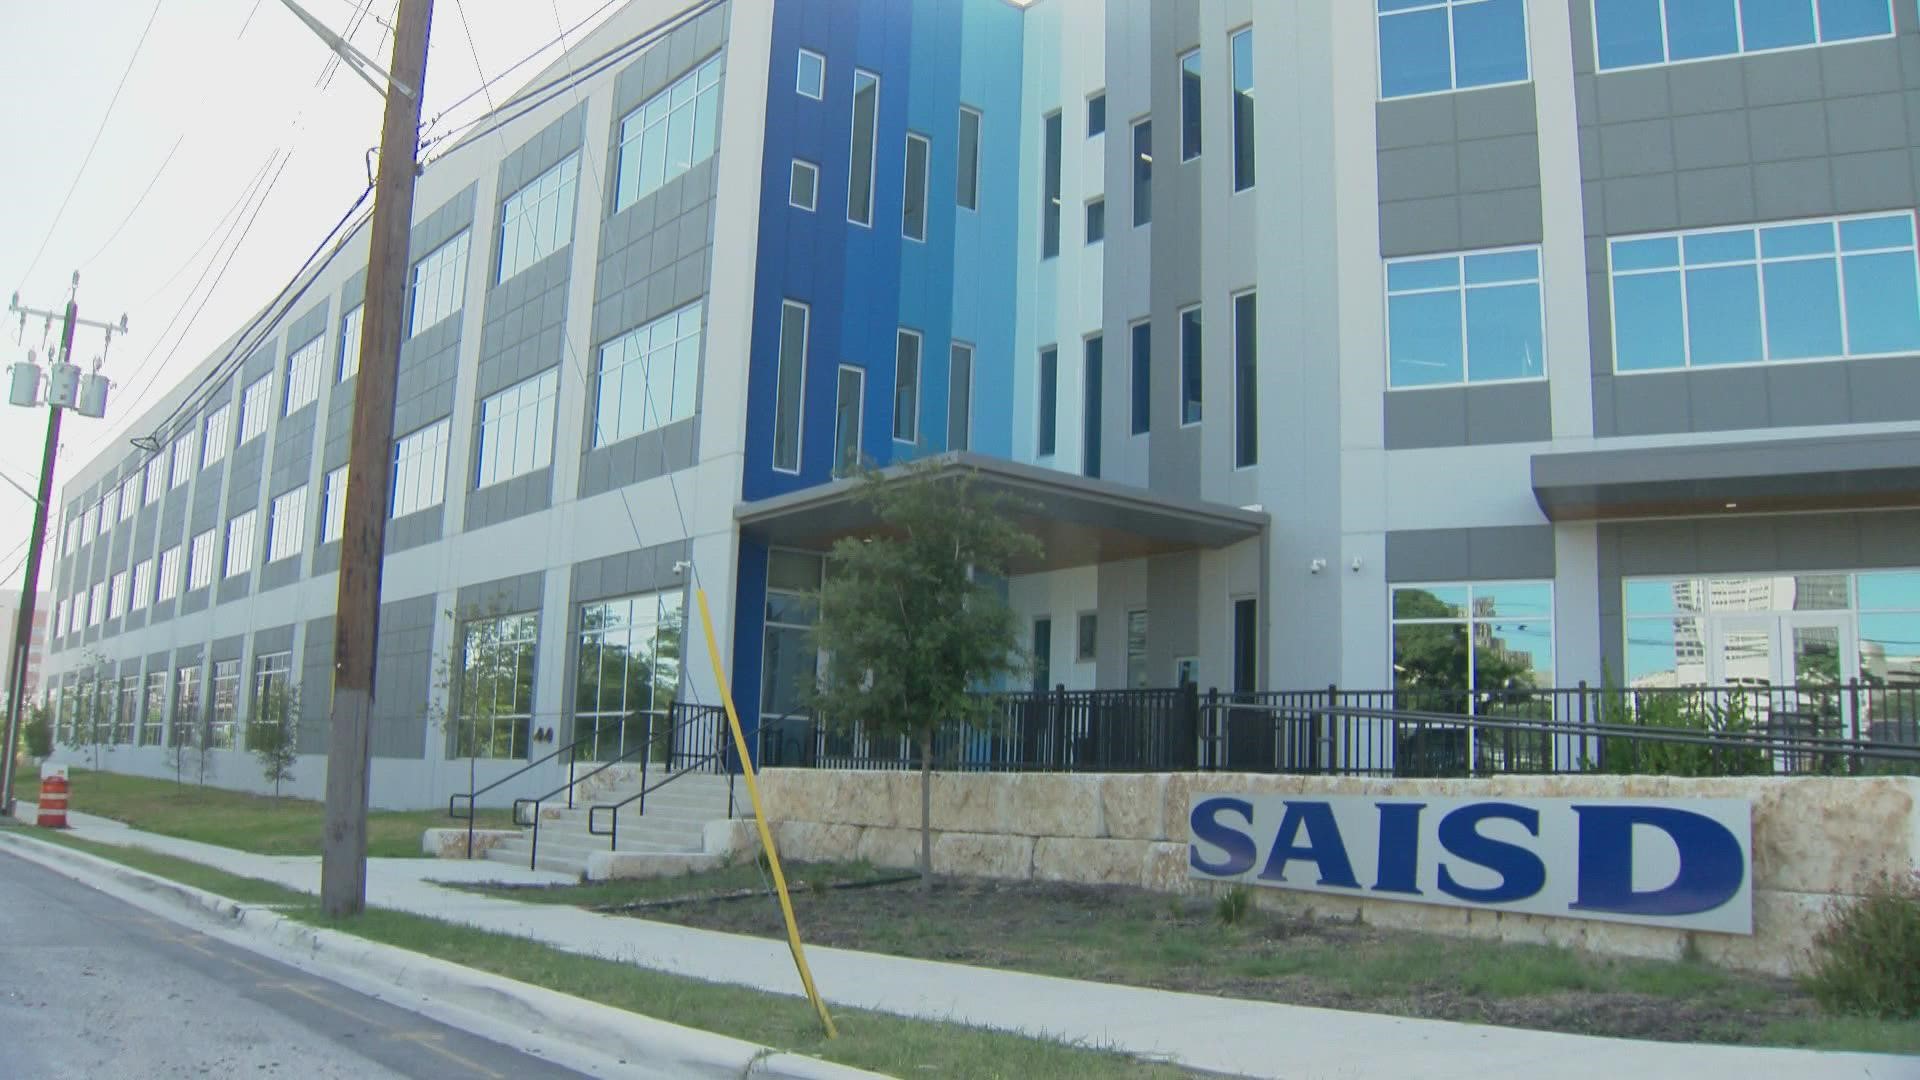 The volatile construction market is putting costs at a premium, but SAISD says their budget is still enough to fulfill their Bond 2020 promise.